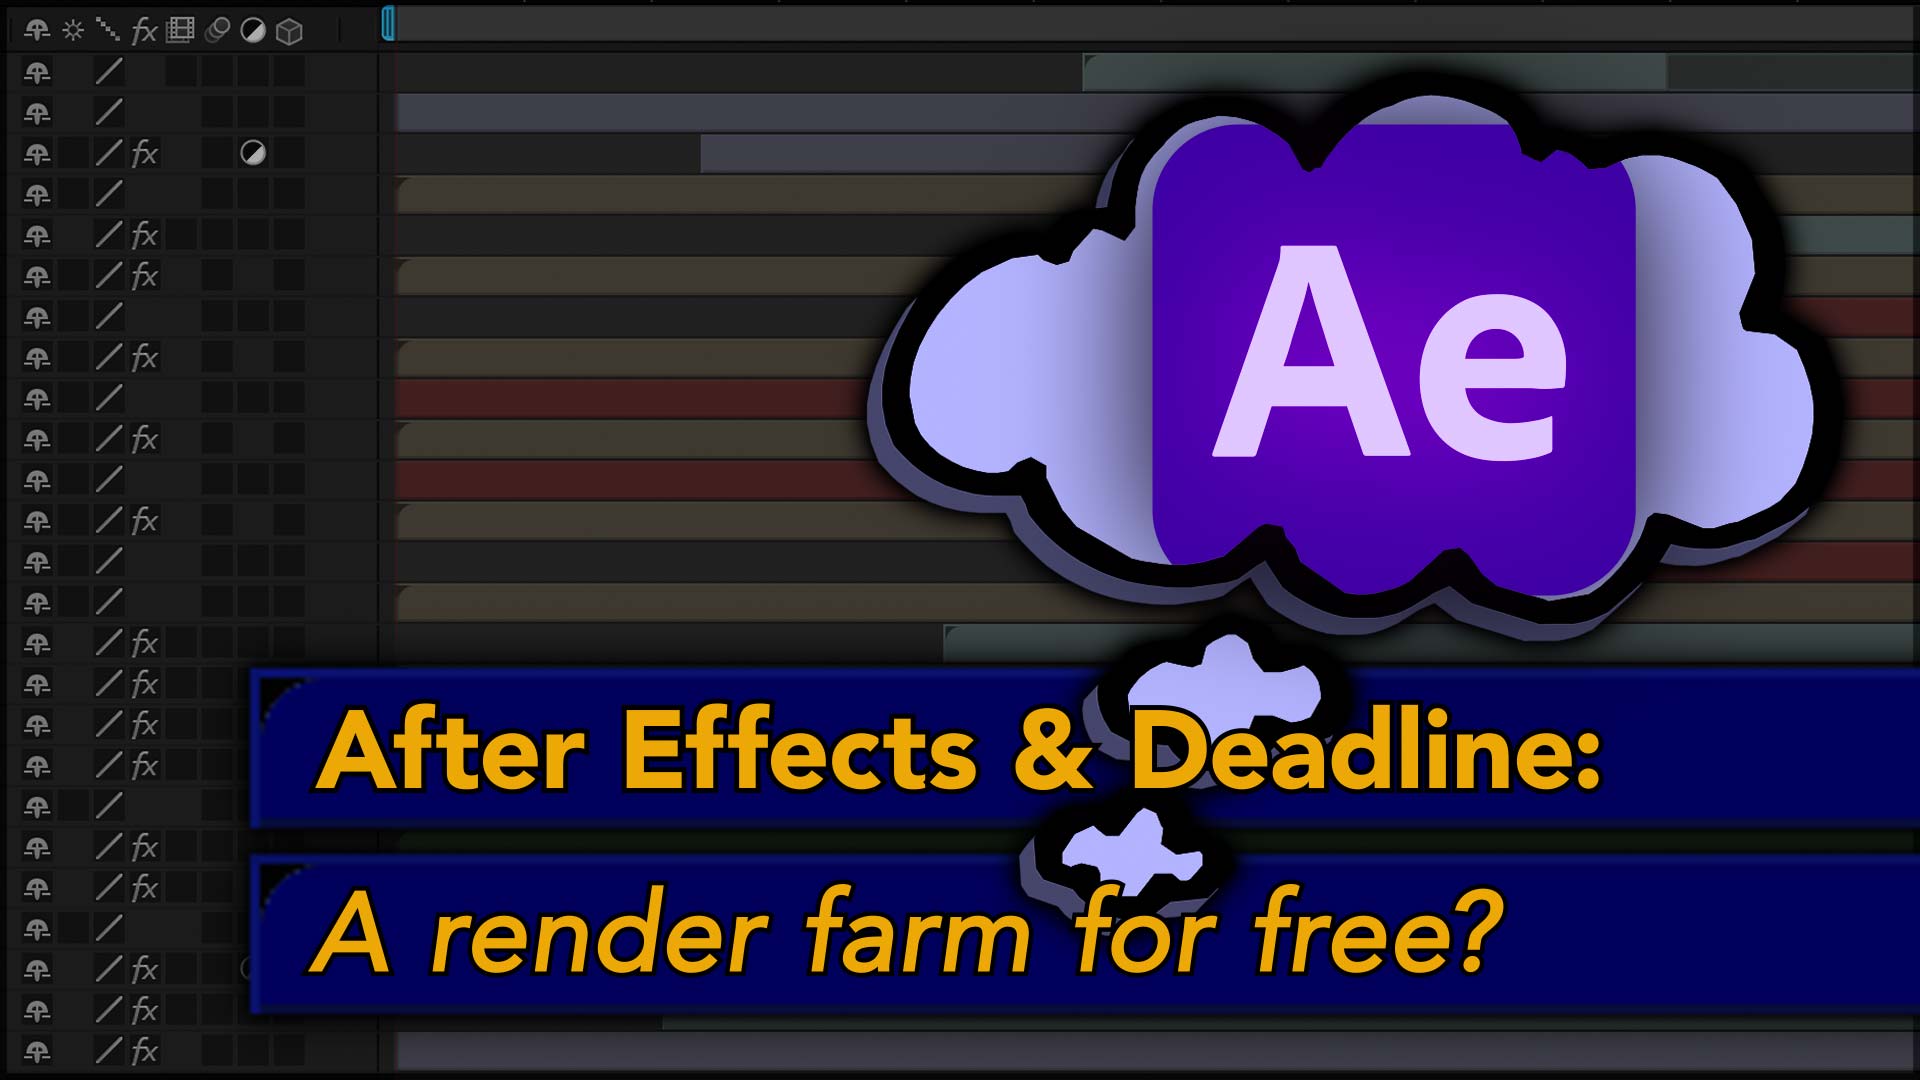 After Effects: Using Deadline for a Render Farm 5